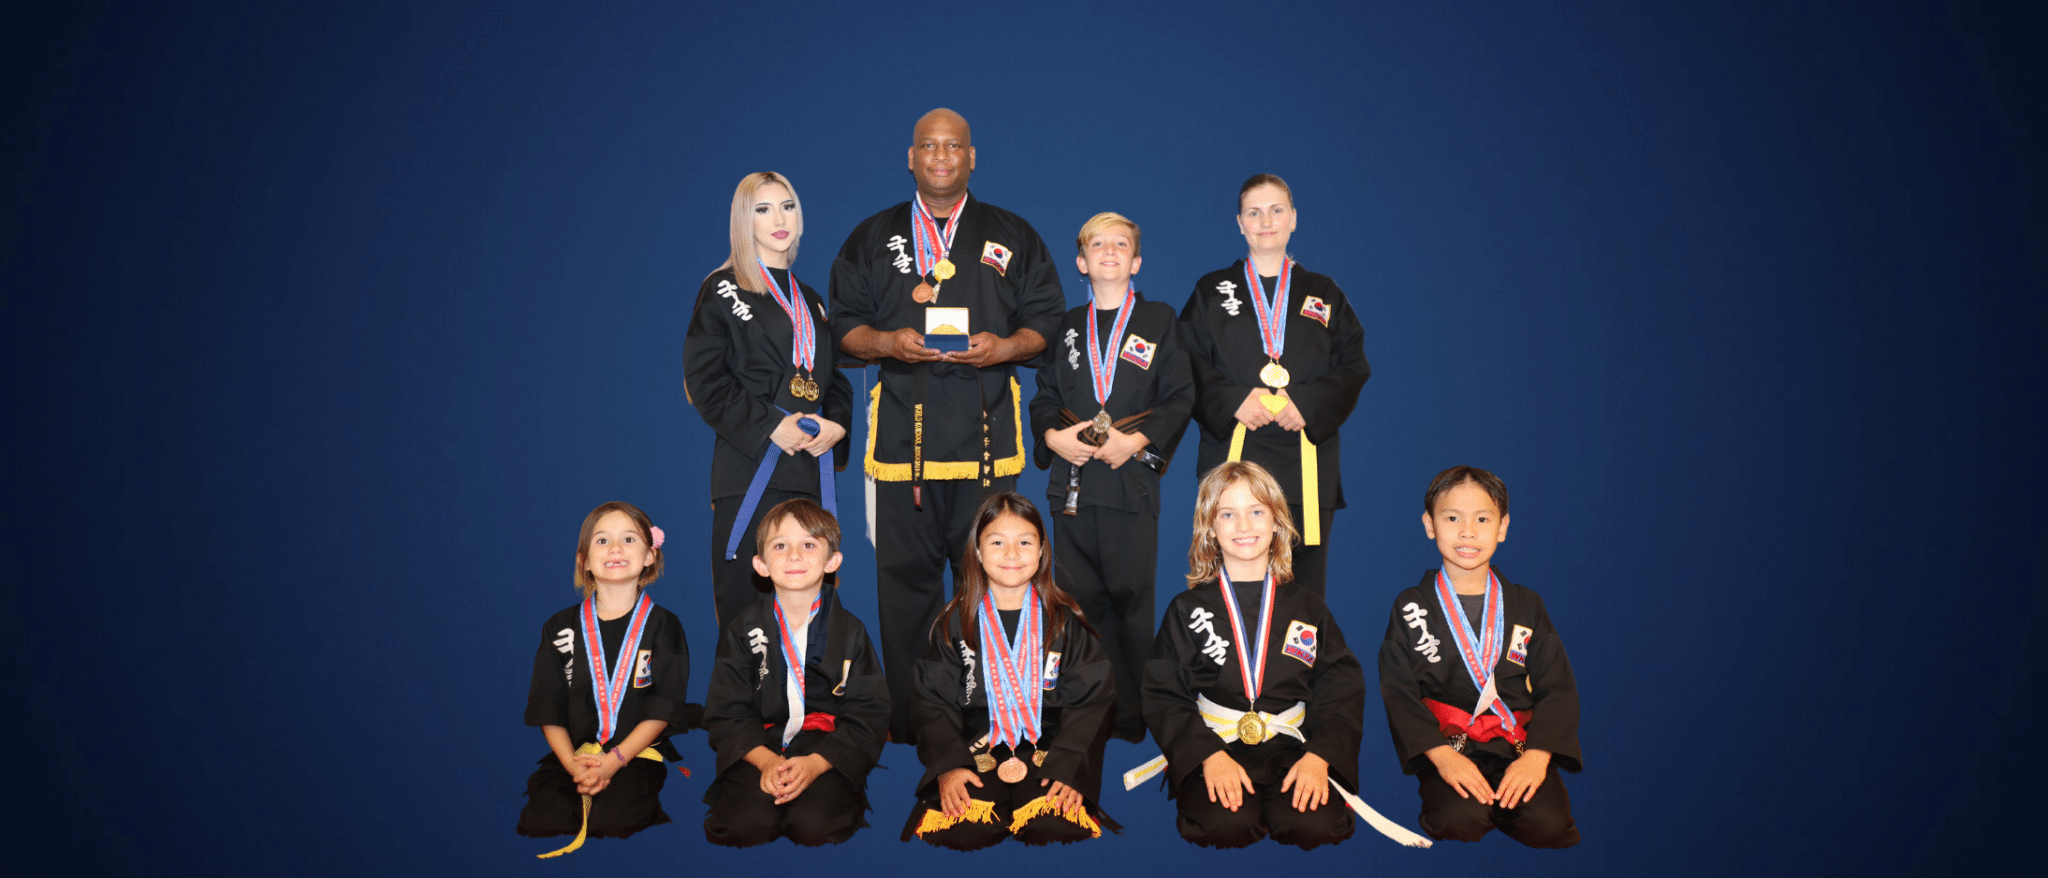 Family Martial Arts offers a unique approach in Sherman Oaks